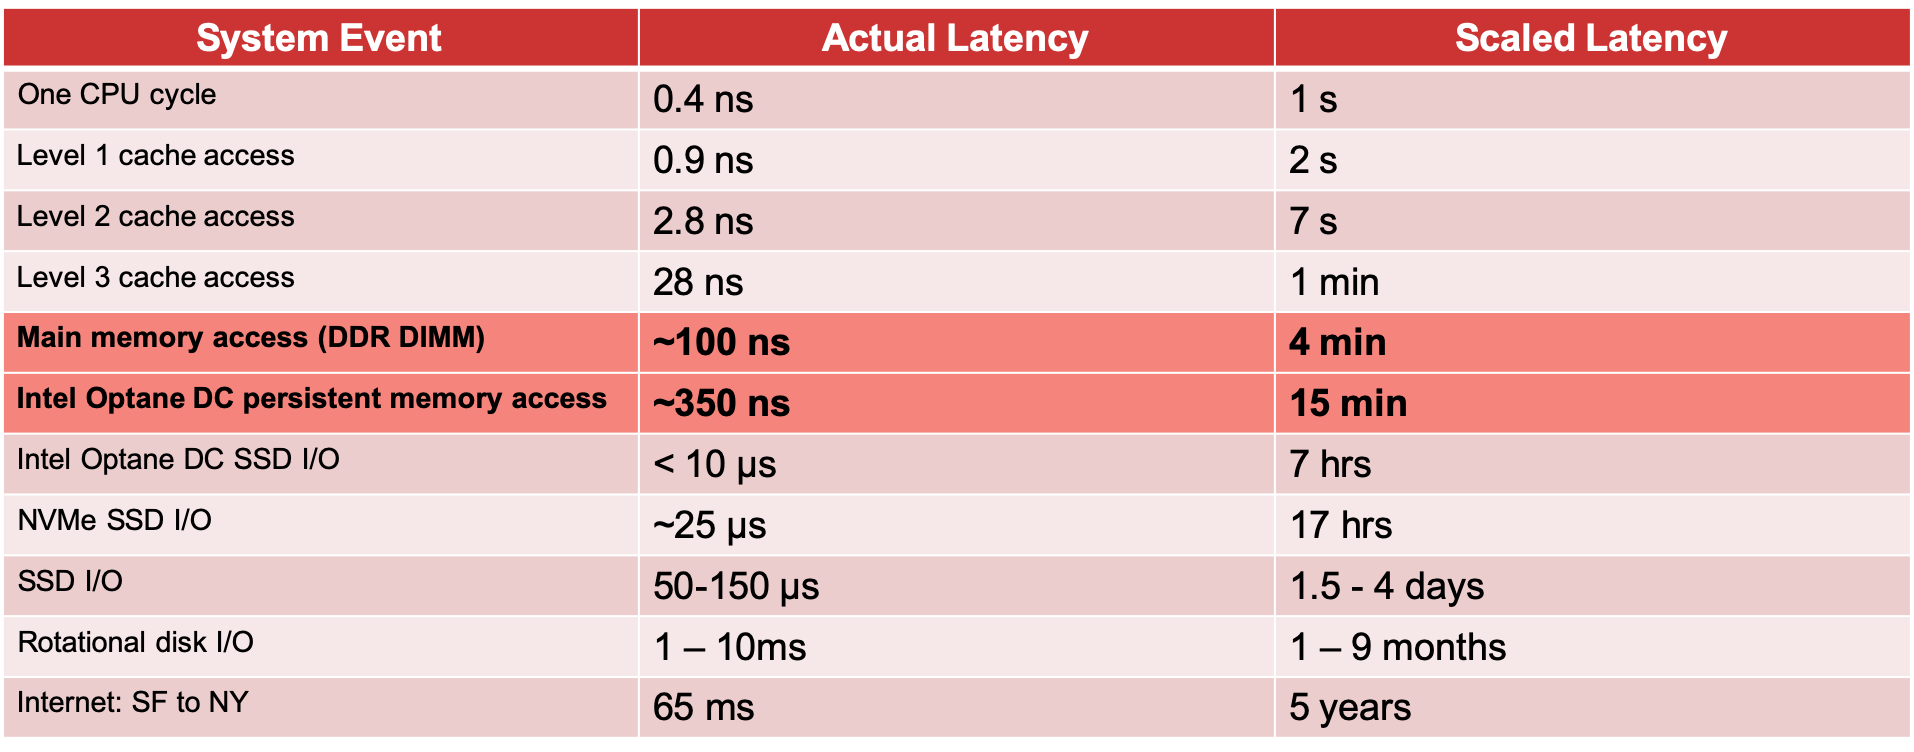 Computer Latency at Human Scale